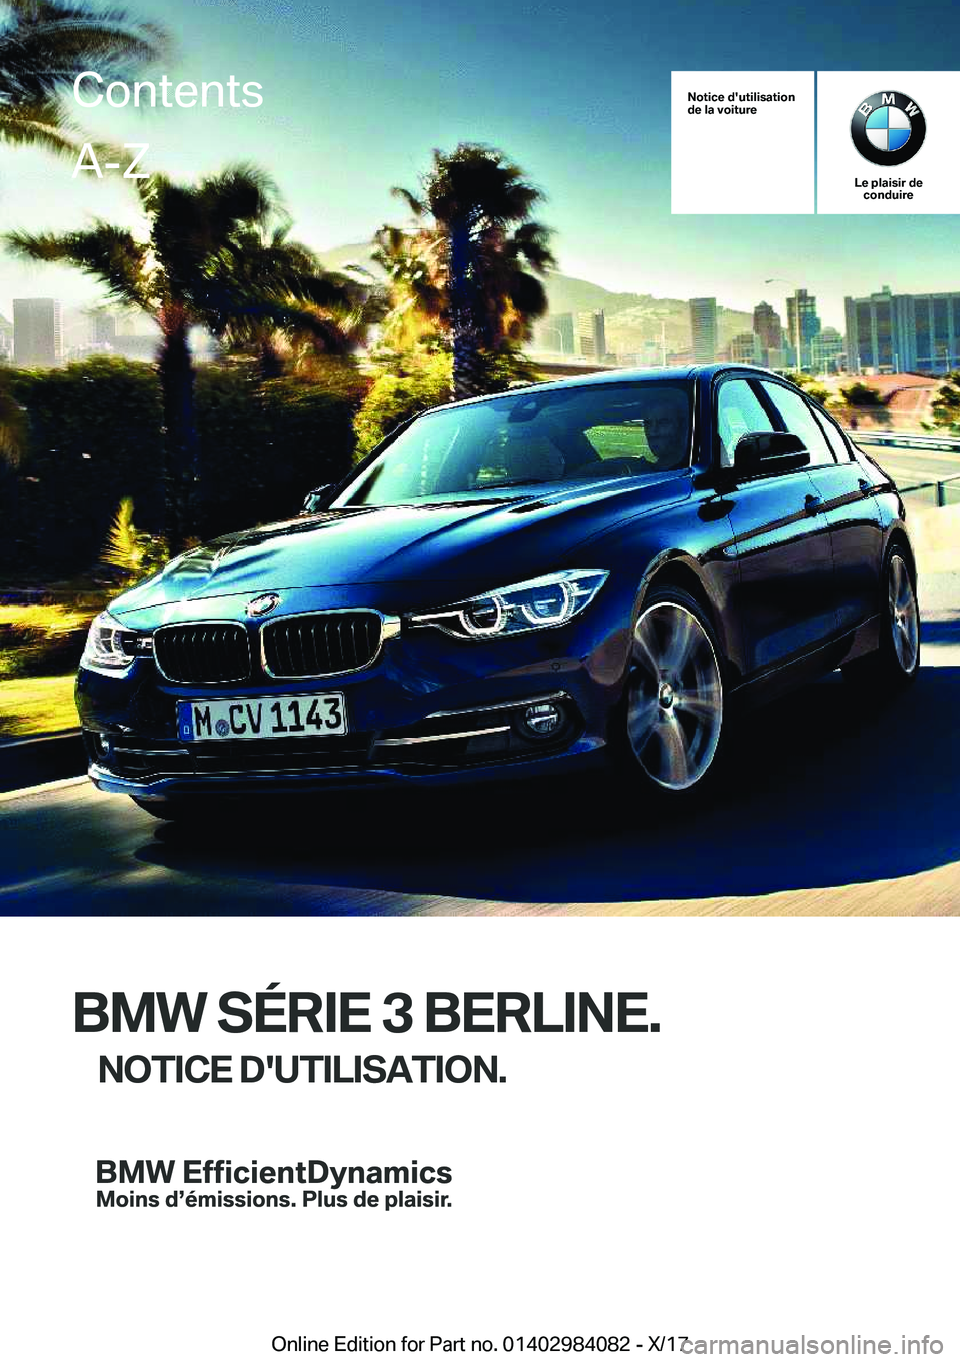 BMW 3 SERIES 2018  Notices Demploi (in French) �N�o�t�i�c�e��d�'�u�t�i�l�i�s�a�t�i�o�n
�d�e��l�a��v�o�i�t�u�r�e
�L�e��p�l�a�i�s�i�r��d�e �c�o�n�d�u�i�r�e
�B�M�W��S�